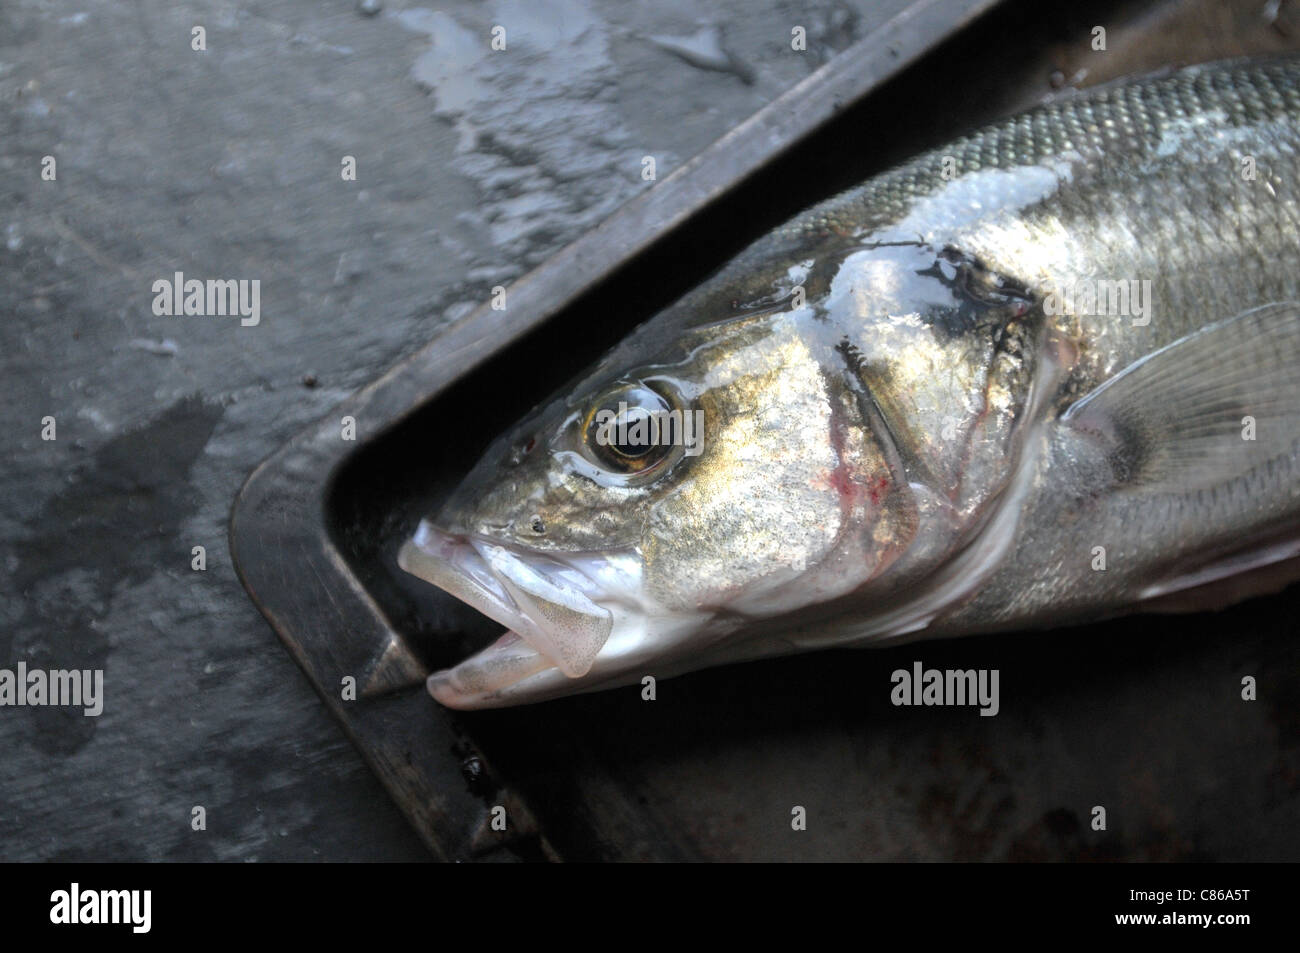 A freshly rod -caught sea bass from the waters of Cornwall on a metal tray Stock Photo